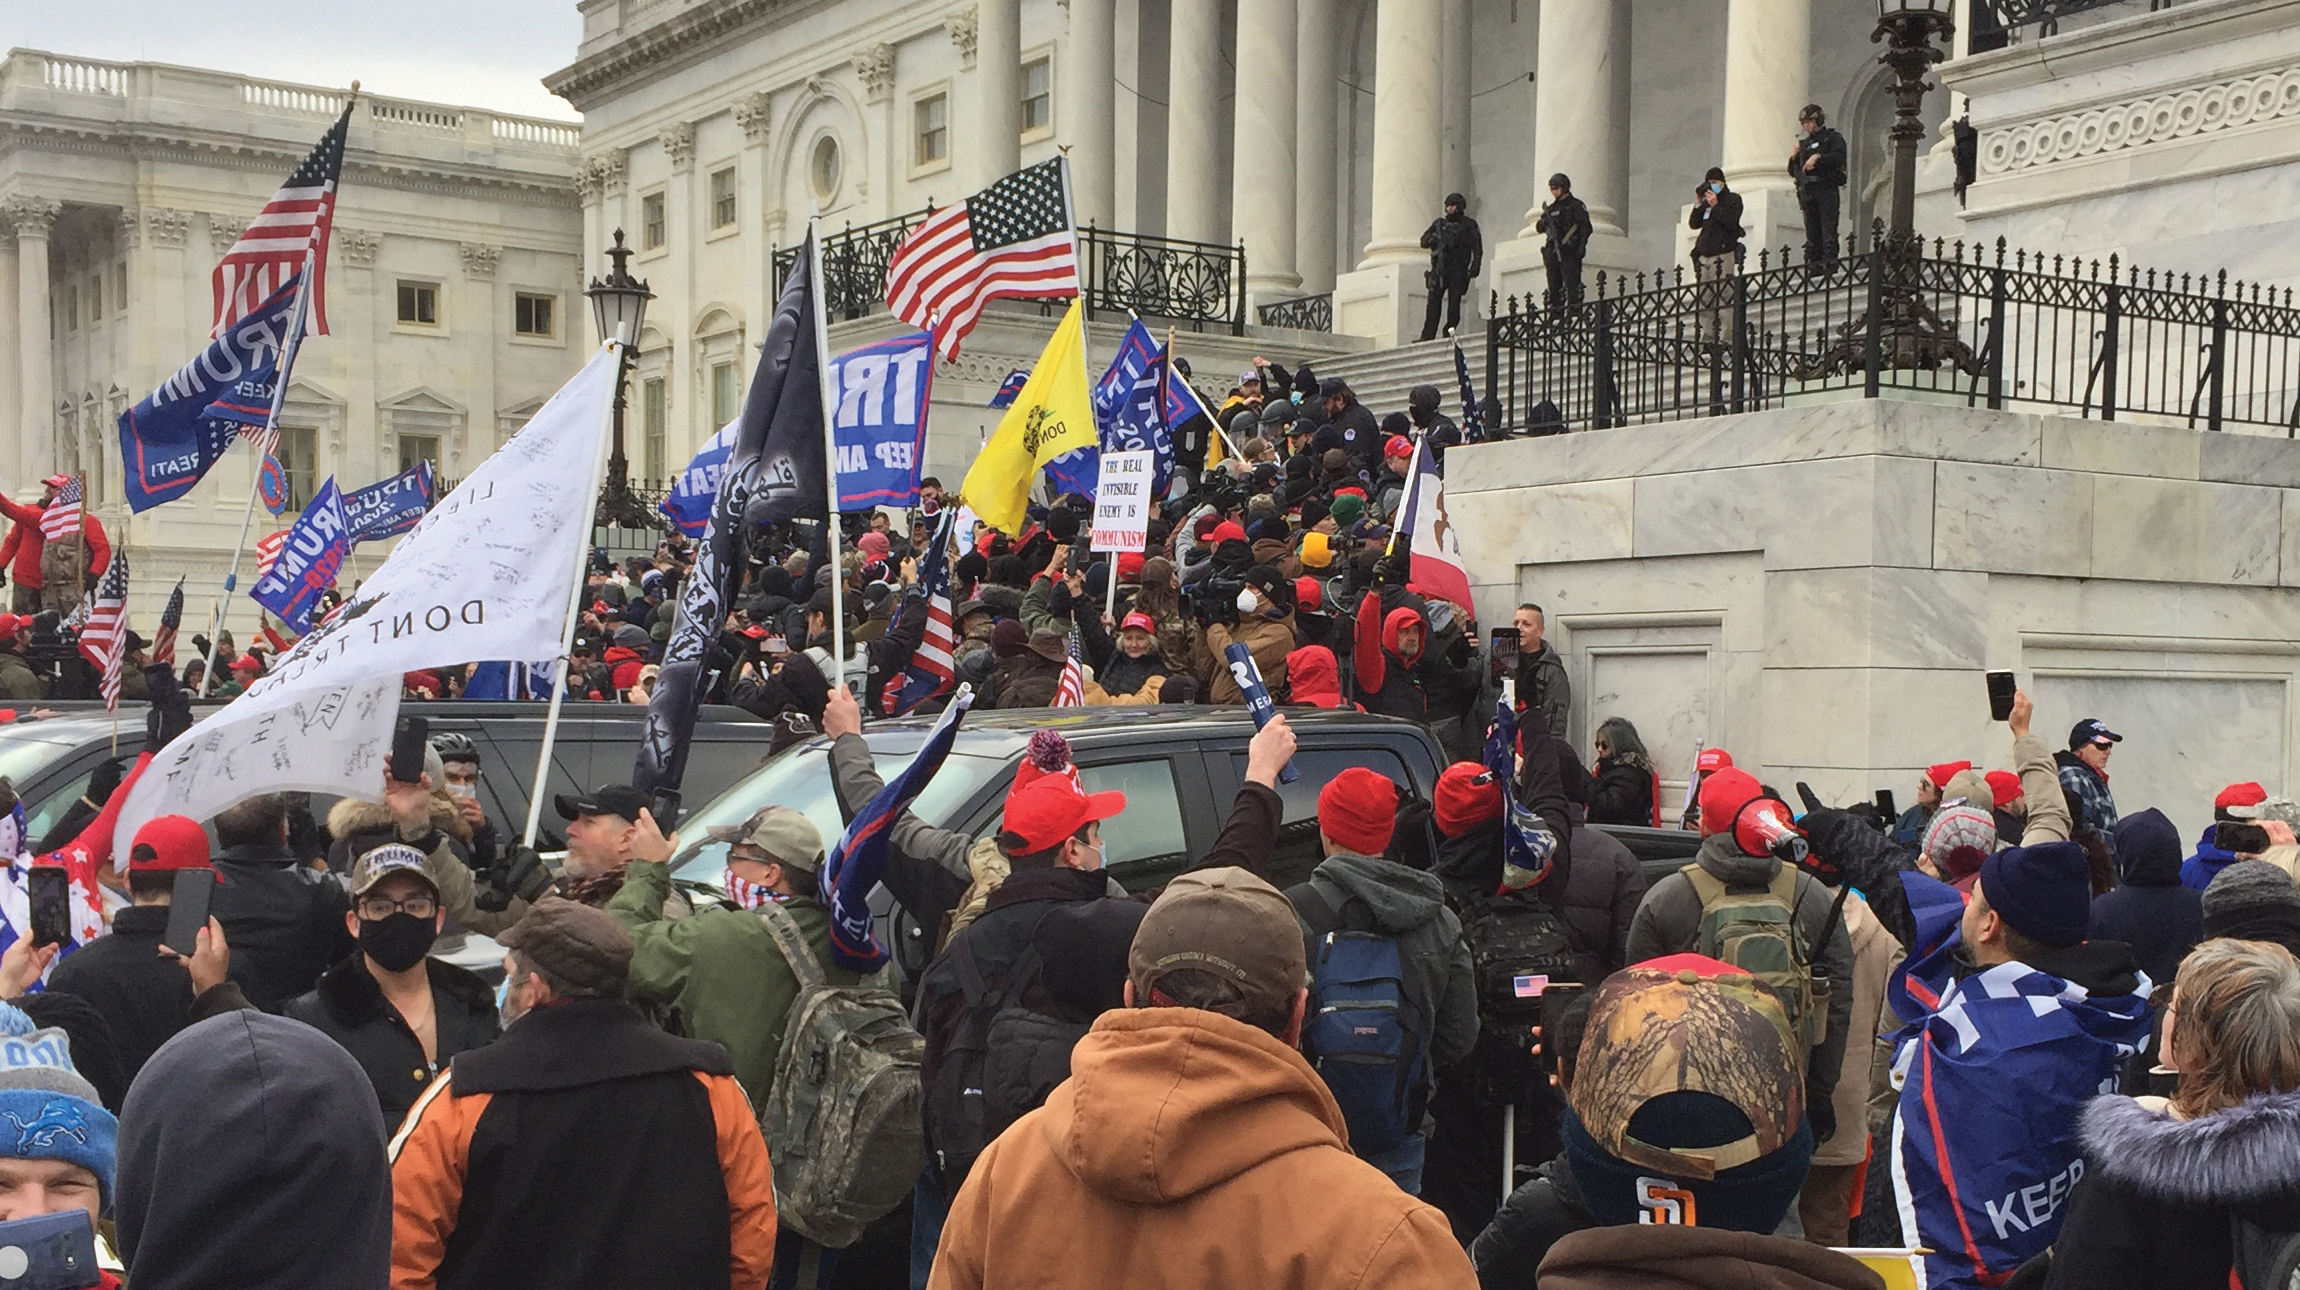 Trump supporters storming D.C. Capitol on January 6, 2021